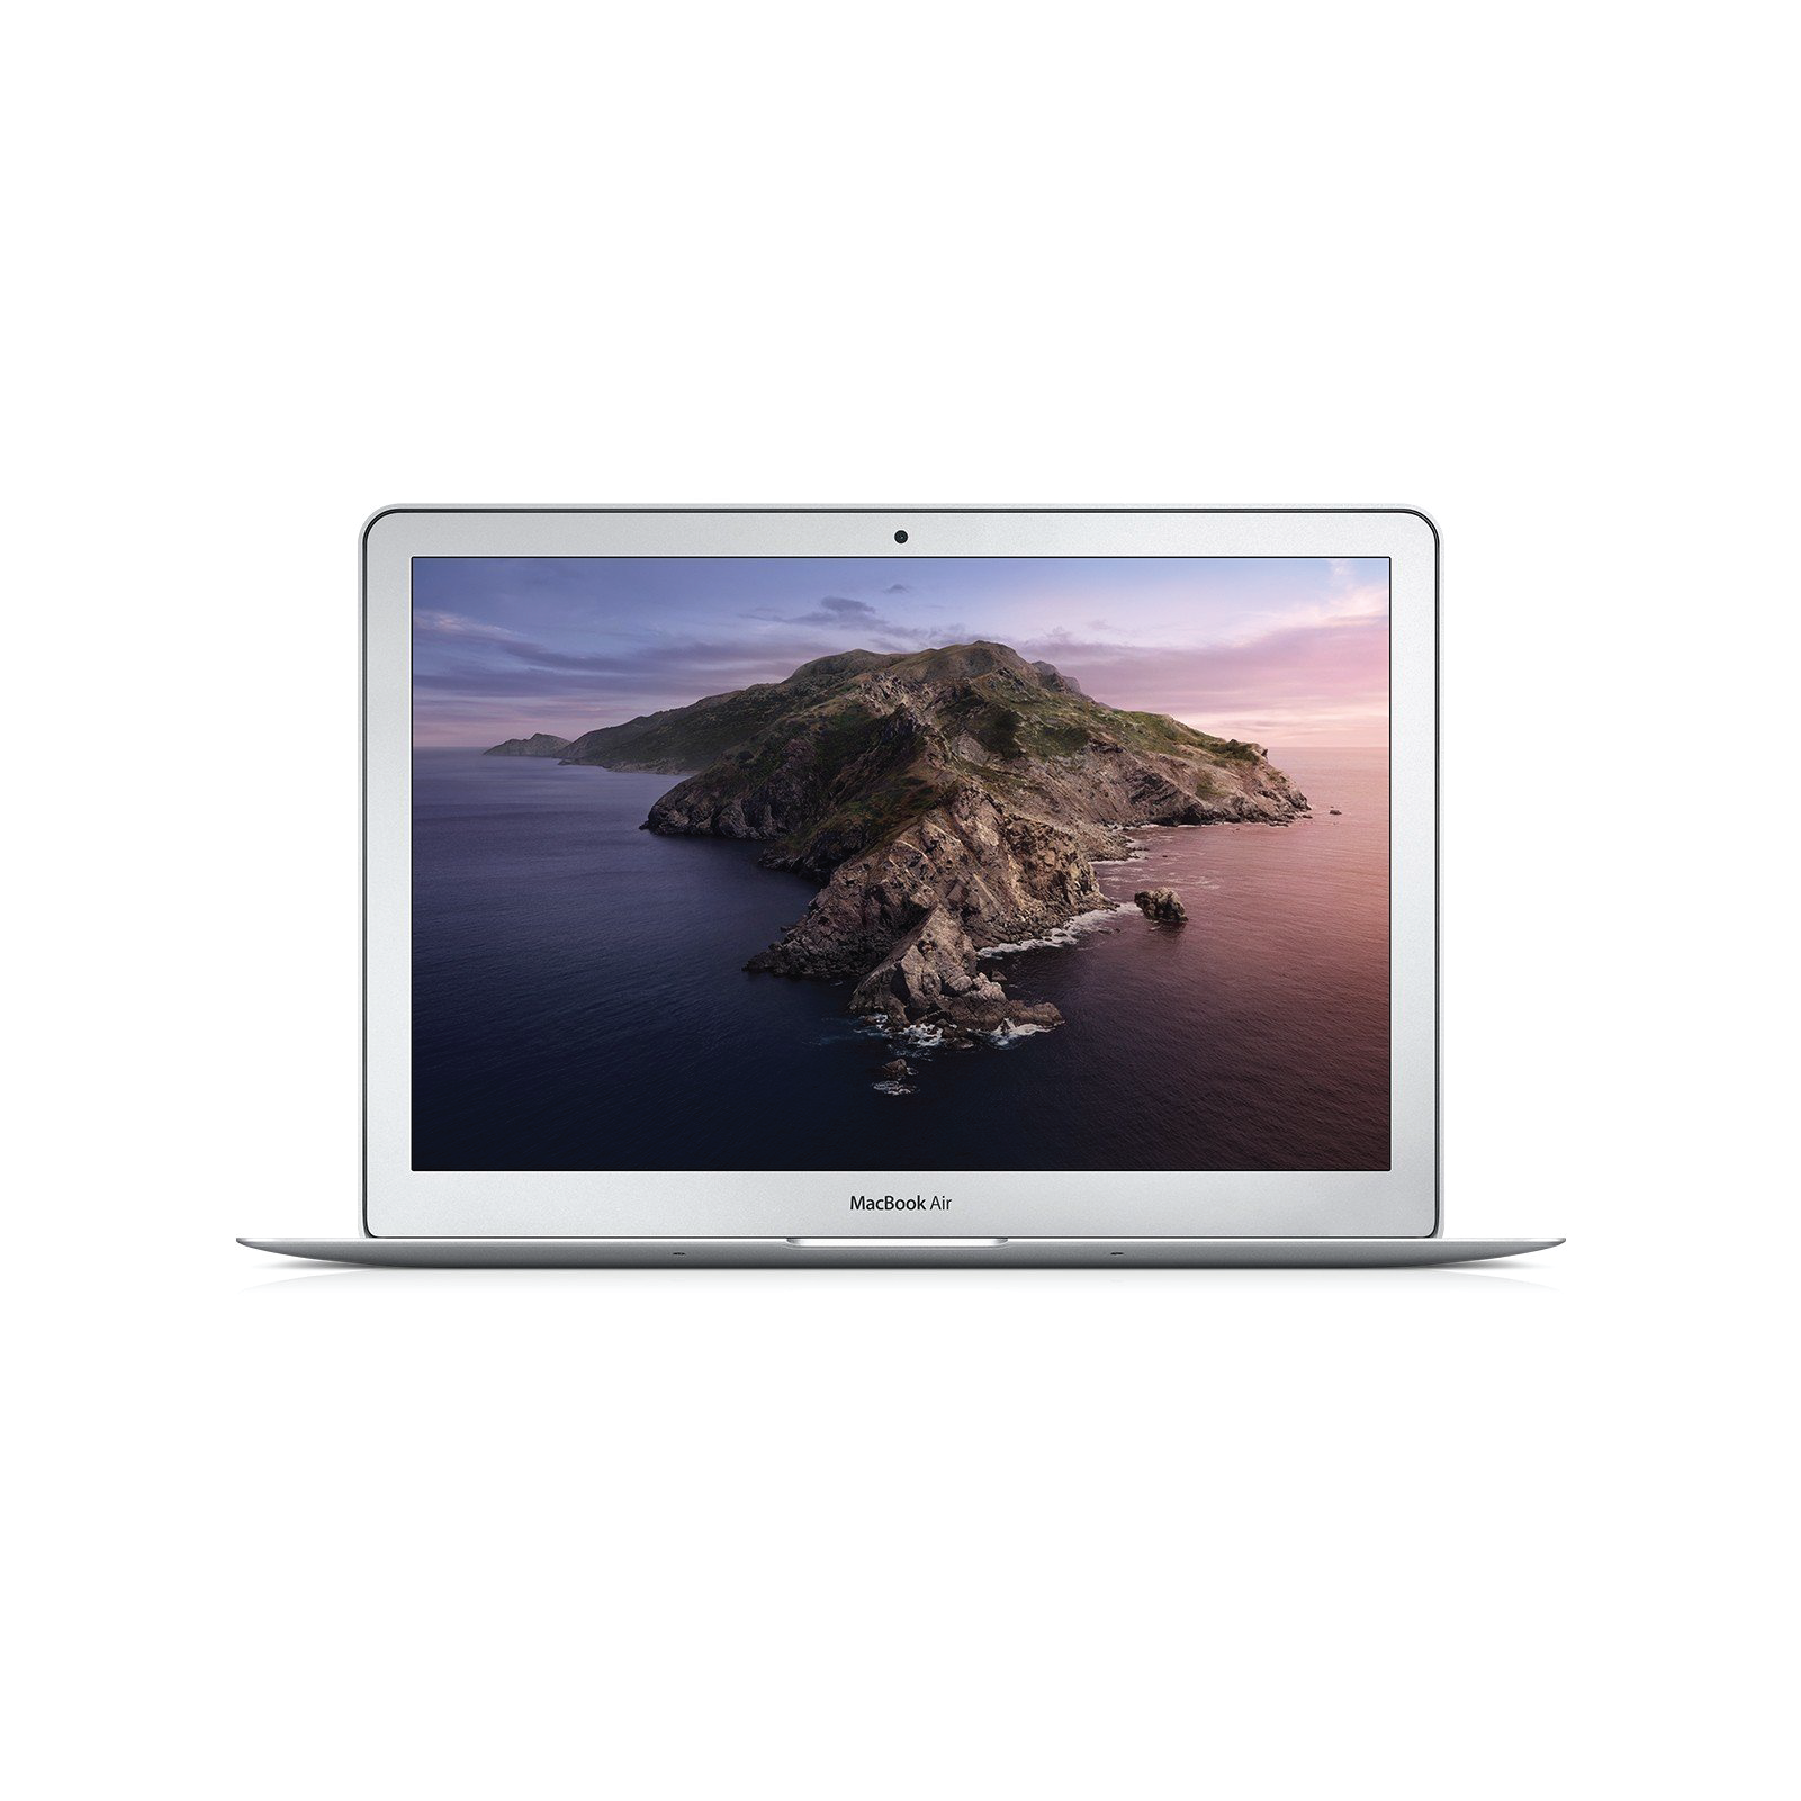 MacBook Air (13-inch, Early 2015) 1.6GHz, Intel Core i5 128GB - Silver